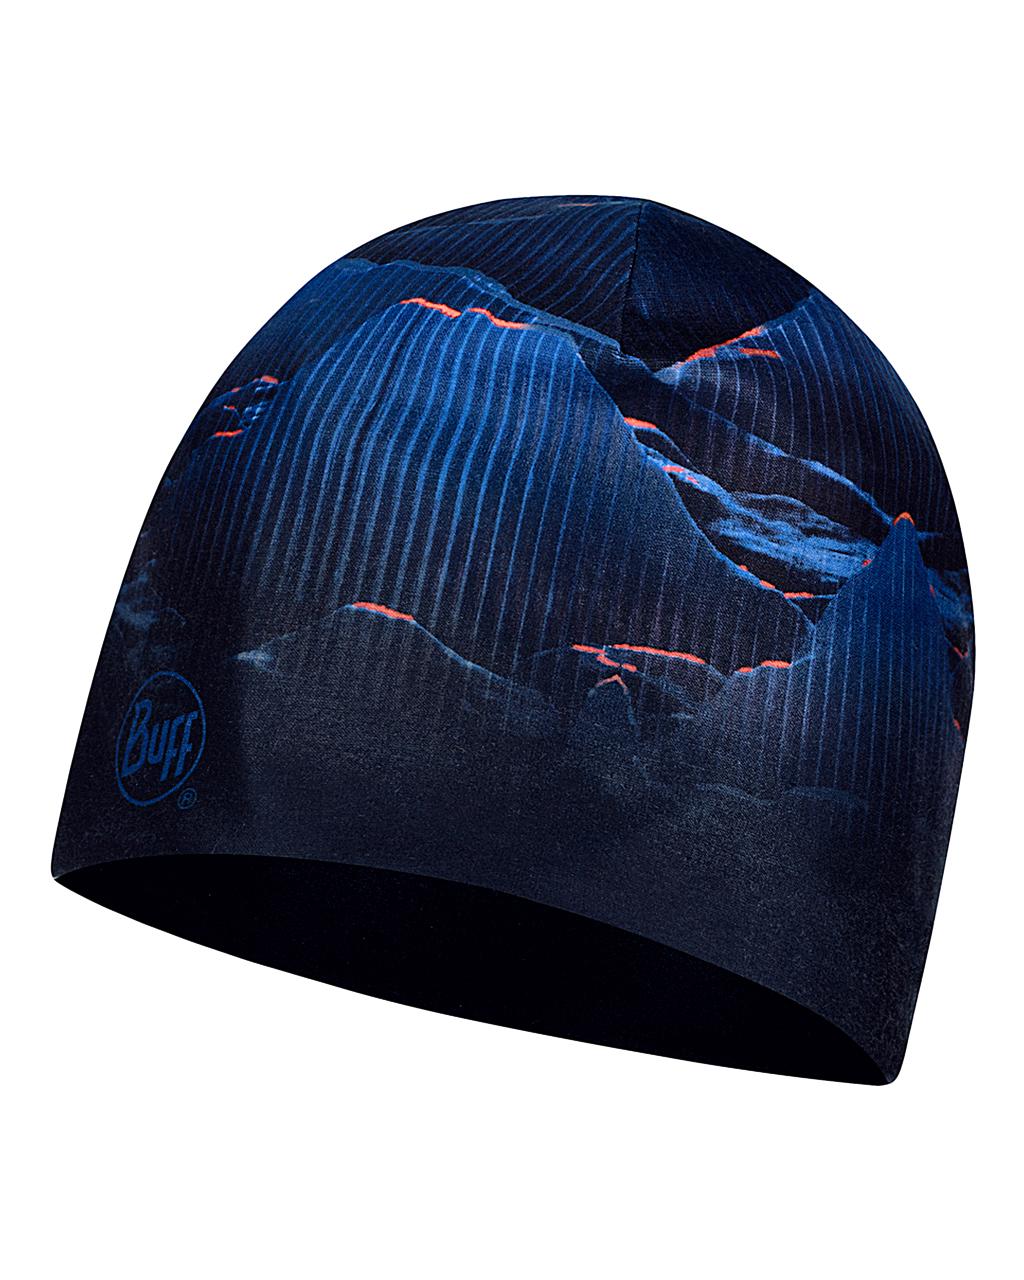 Beanie Buff® Thermonet S-Wave Blue Reversible